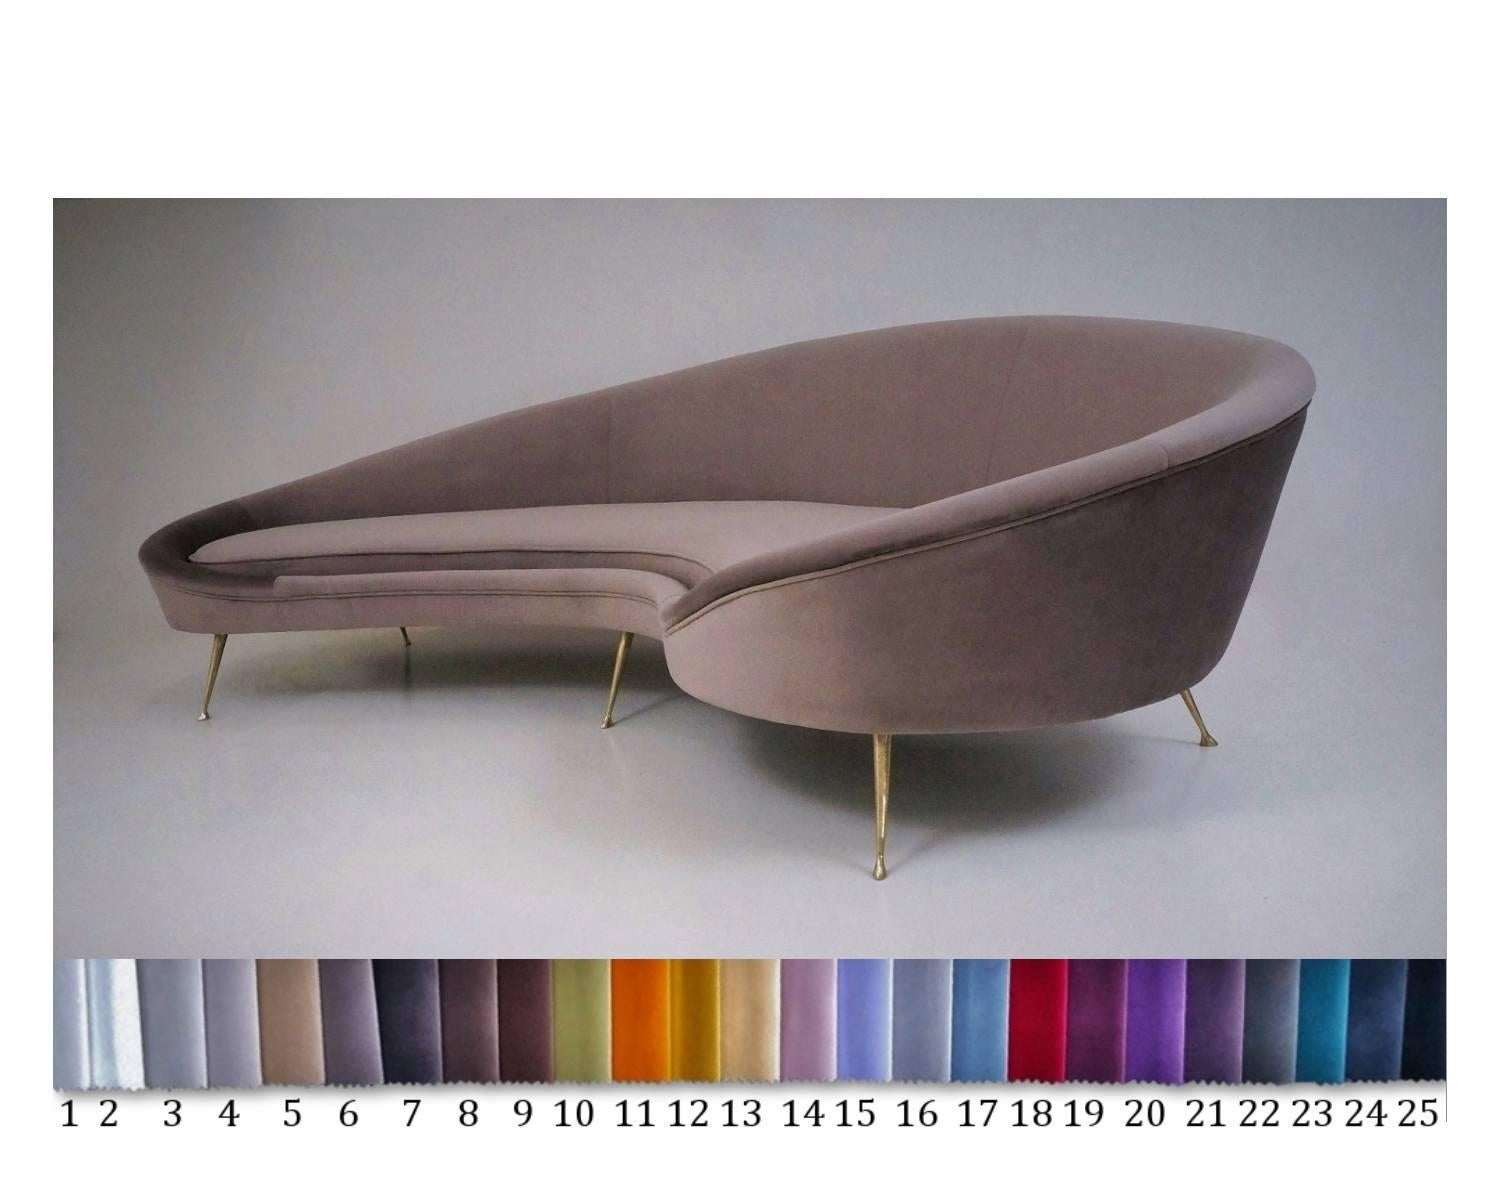 Ico Parisi sofa 1950s style in new velvet upholstery, Italian.

In new 'Greige' color velvet upholstery with solid handmade brass legs, Italian. Made exclusively for our Contemporary Collection.

Also available to order in a choice of 25 colors of